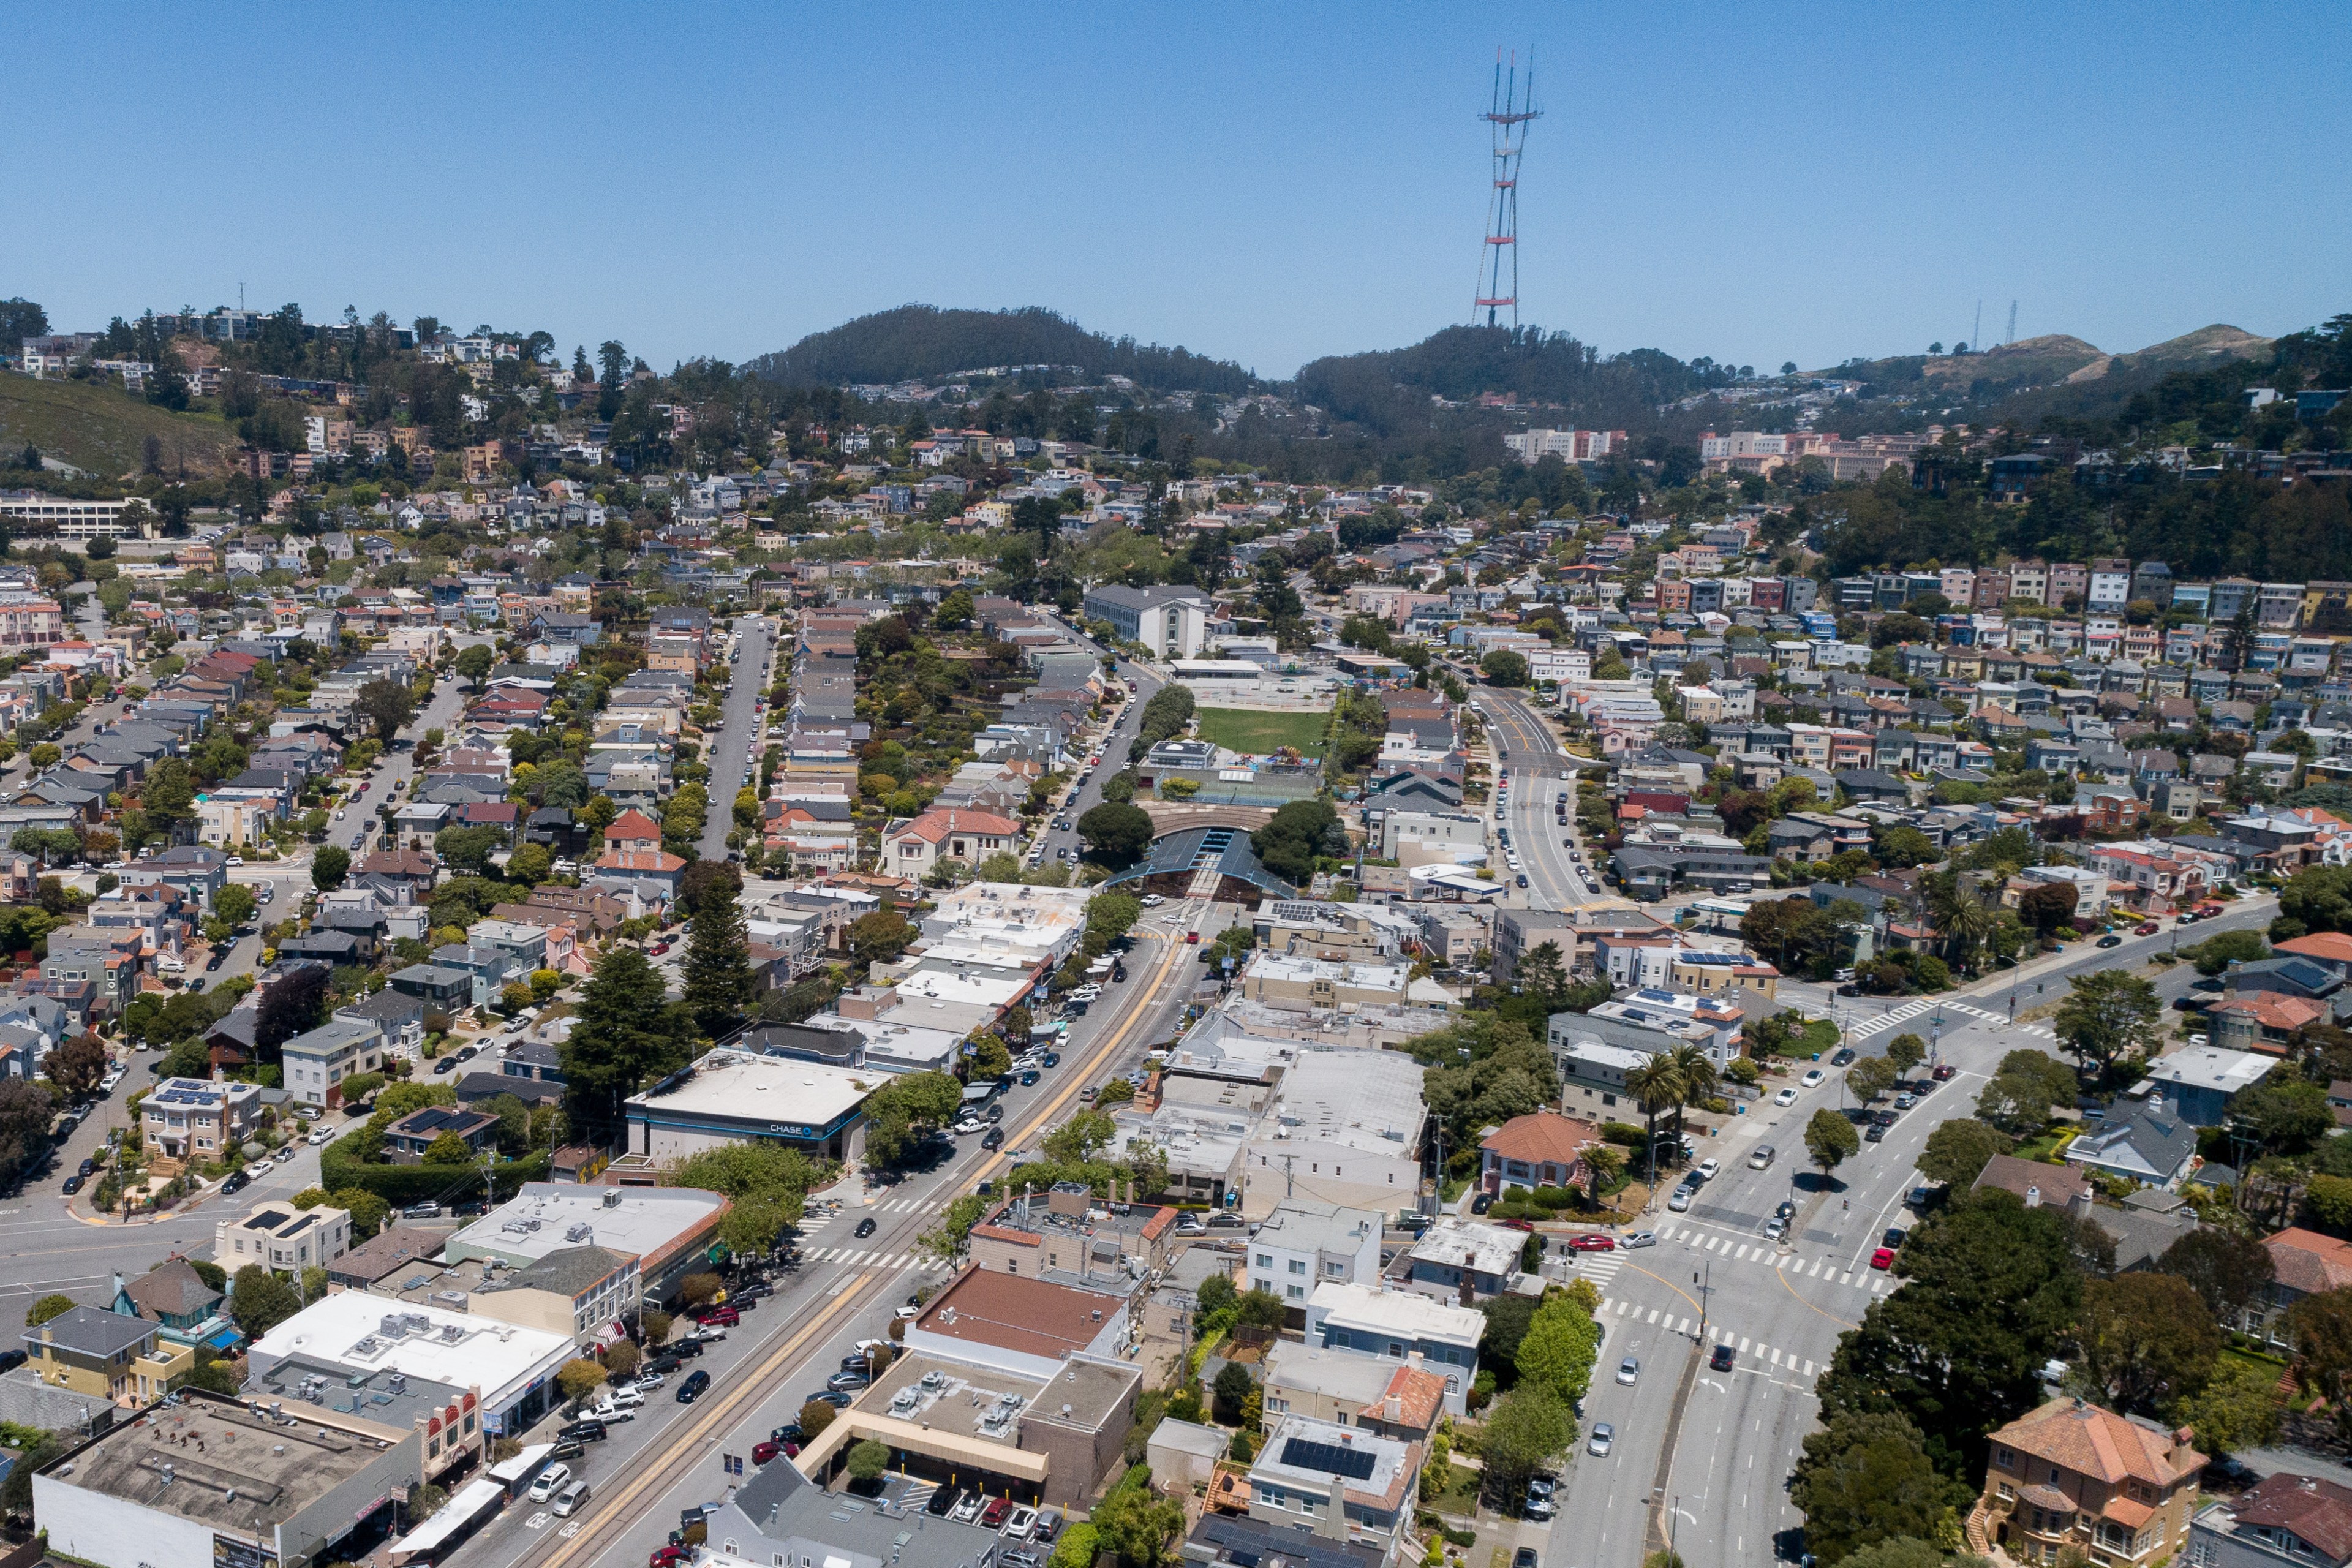 The image shows a dense urban area with rows of houses, roads, and green spaces, all set against a backdrop of hills with a tall communication tower.